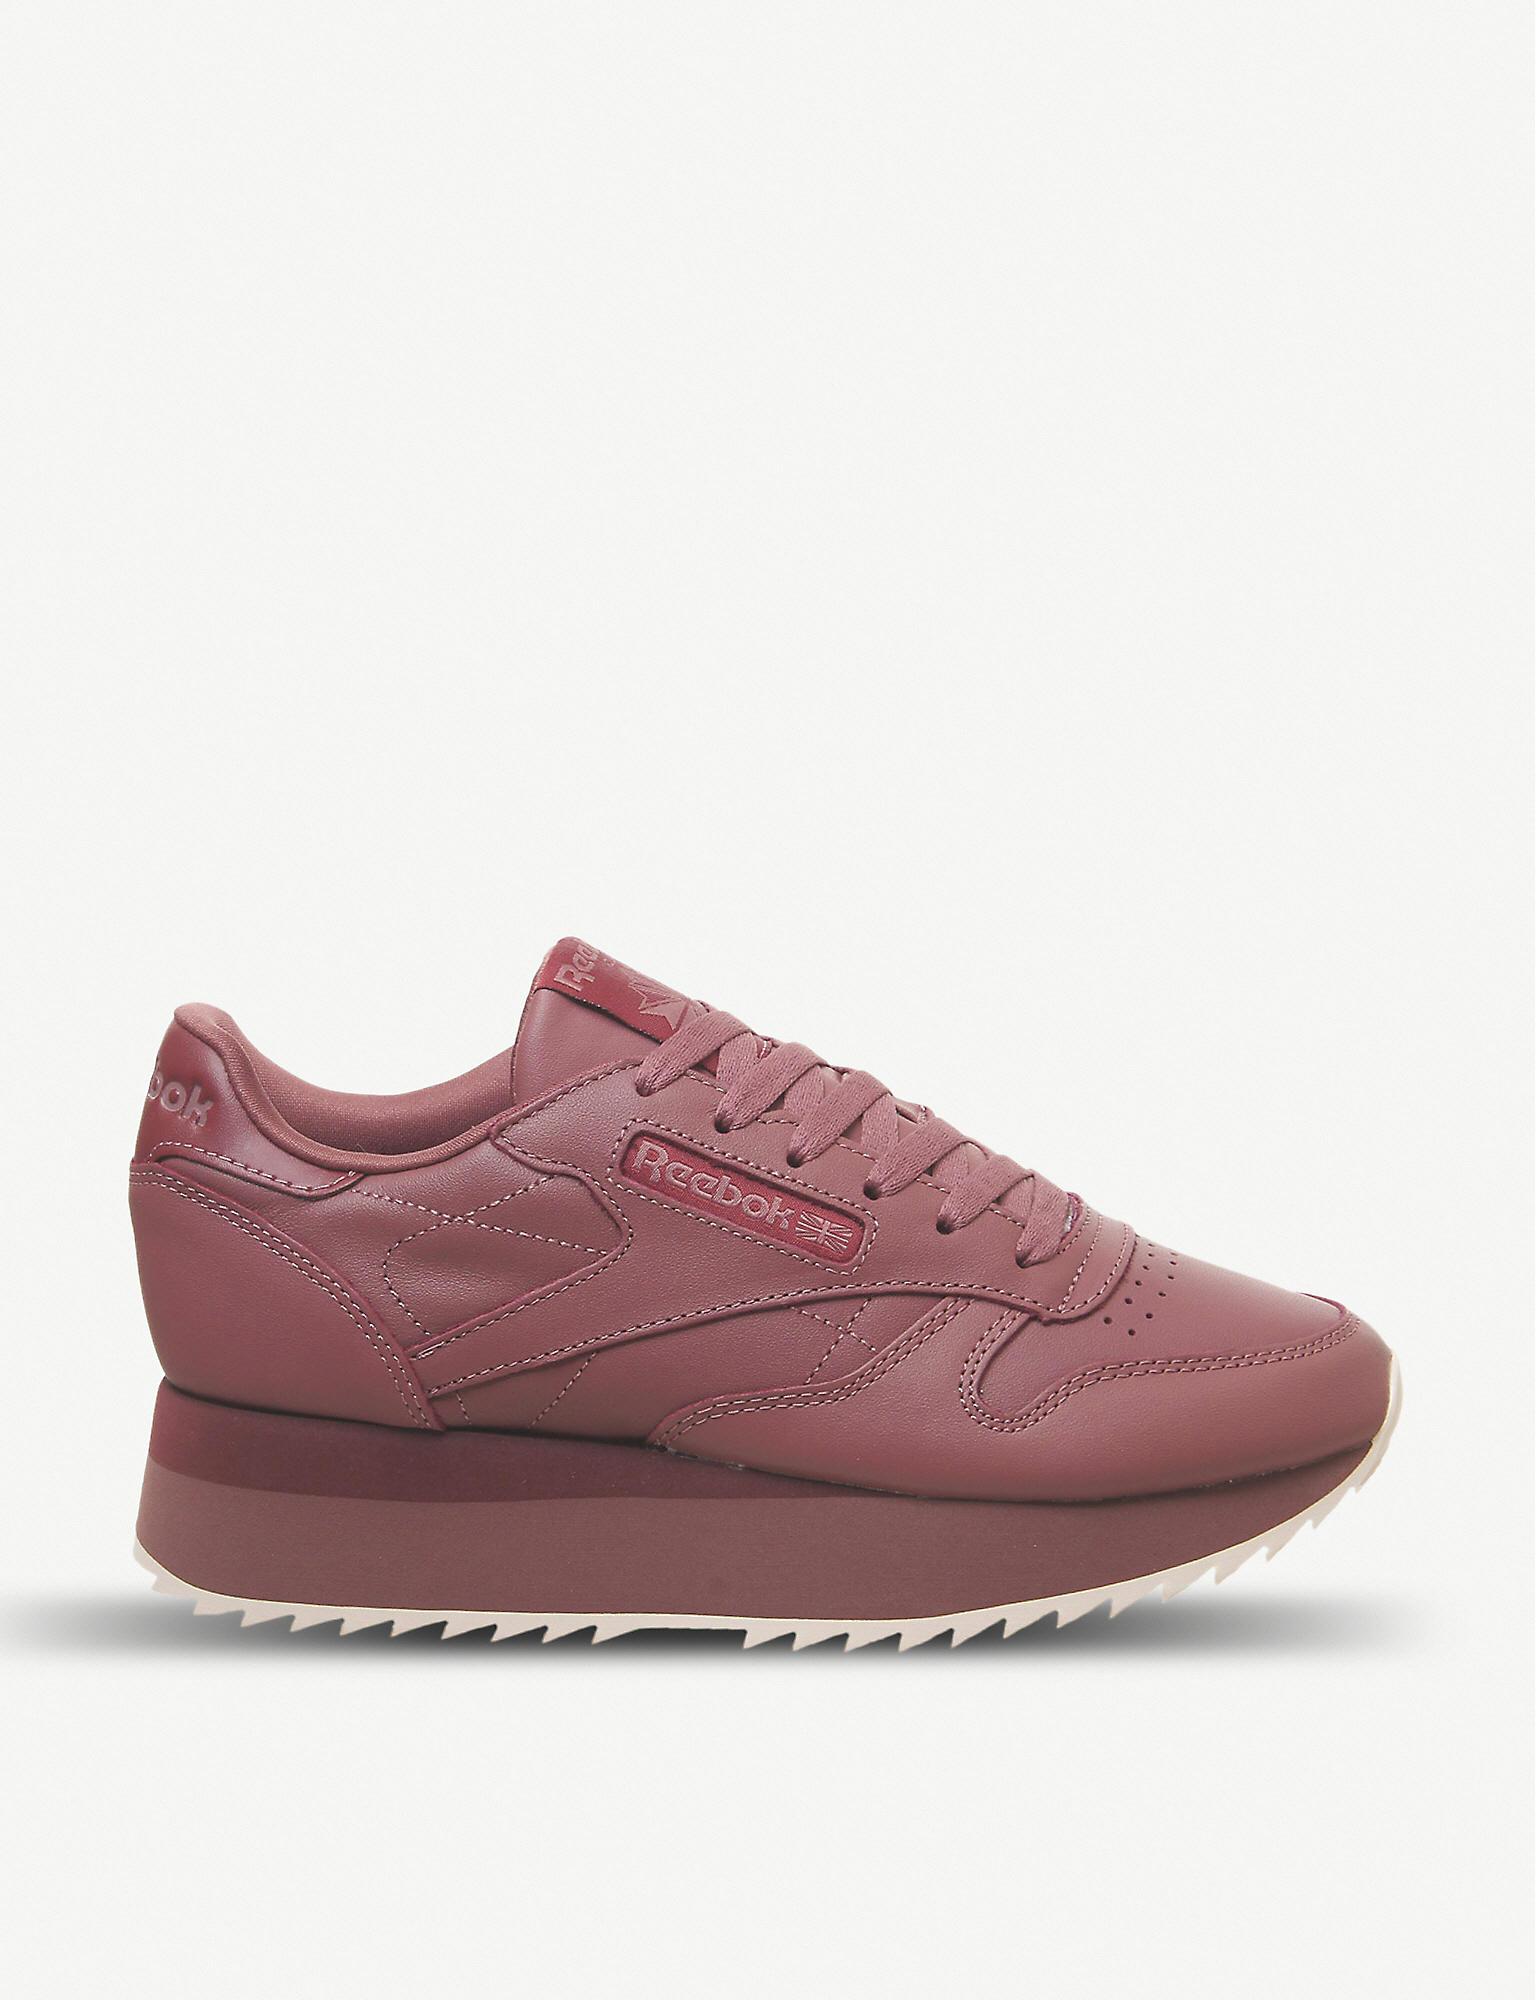 radikal Sway ægtemand Reebok Classic Leather Double Platform Leather Trainers in Pink - Lyst